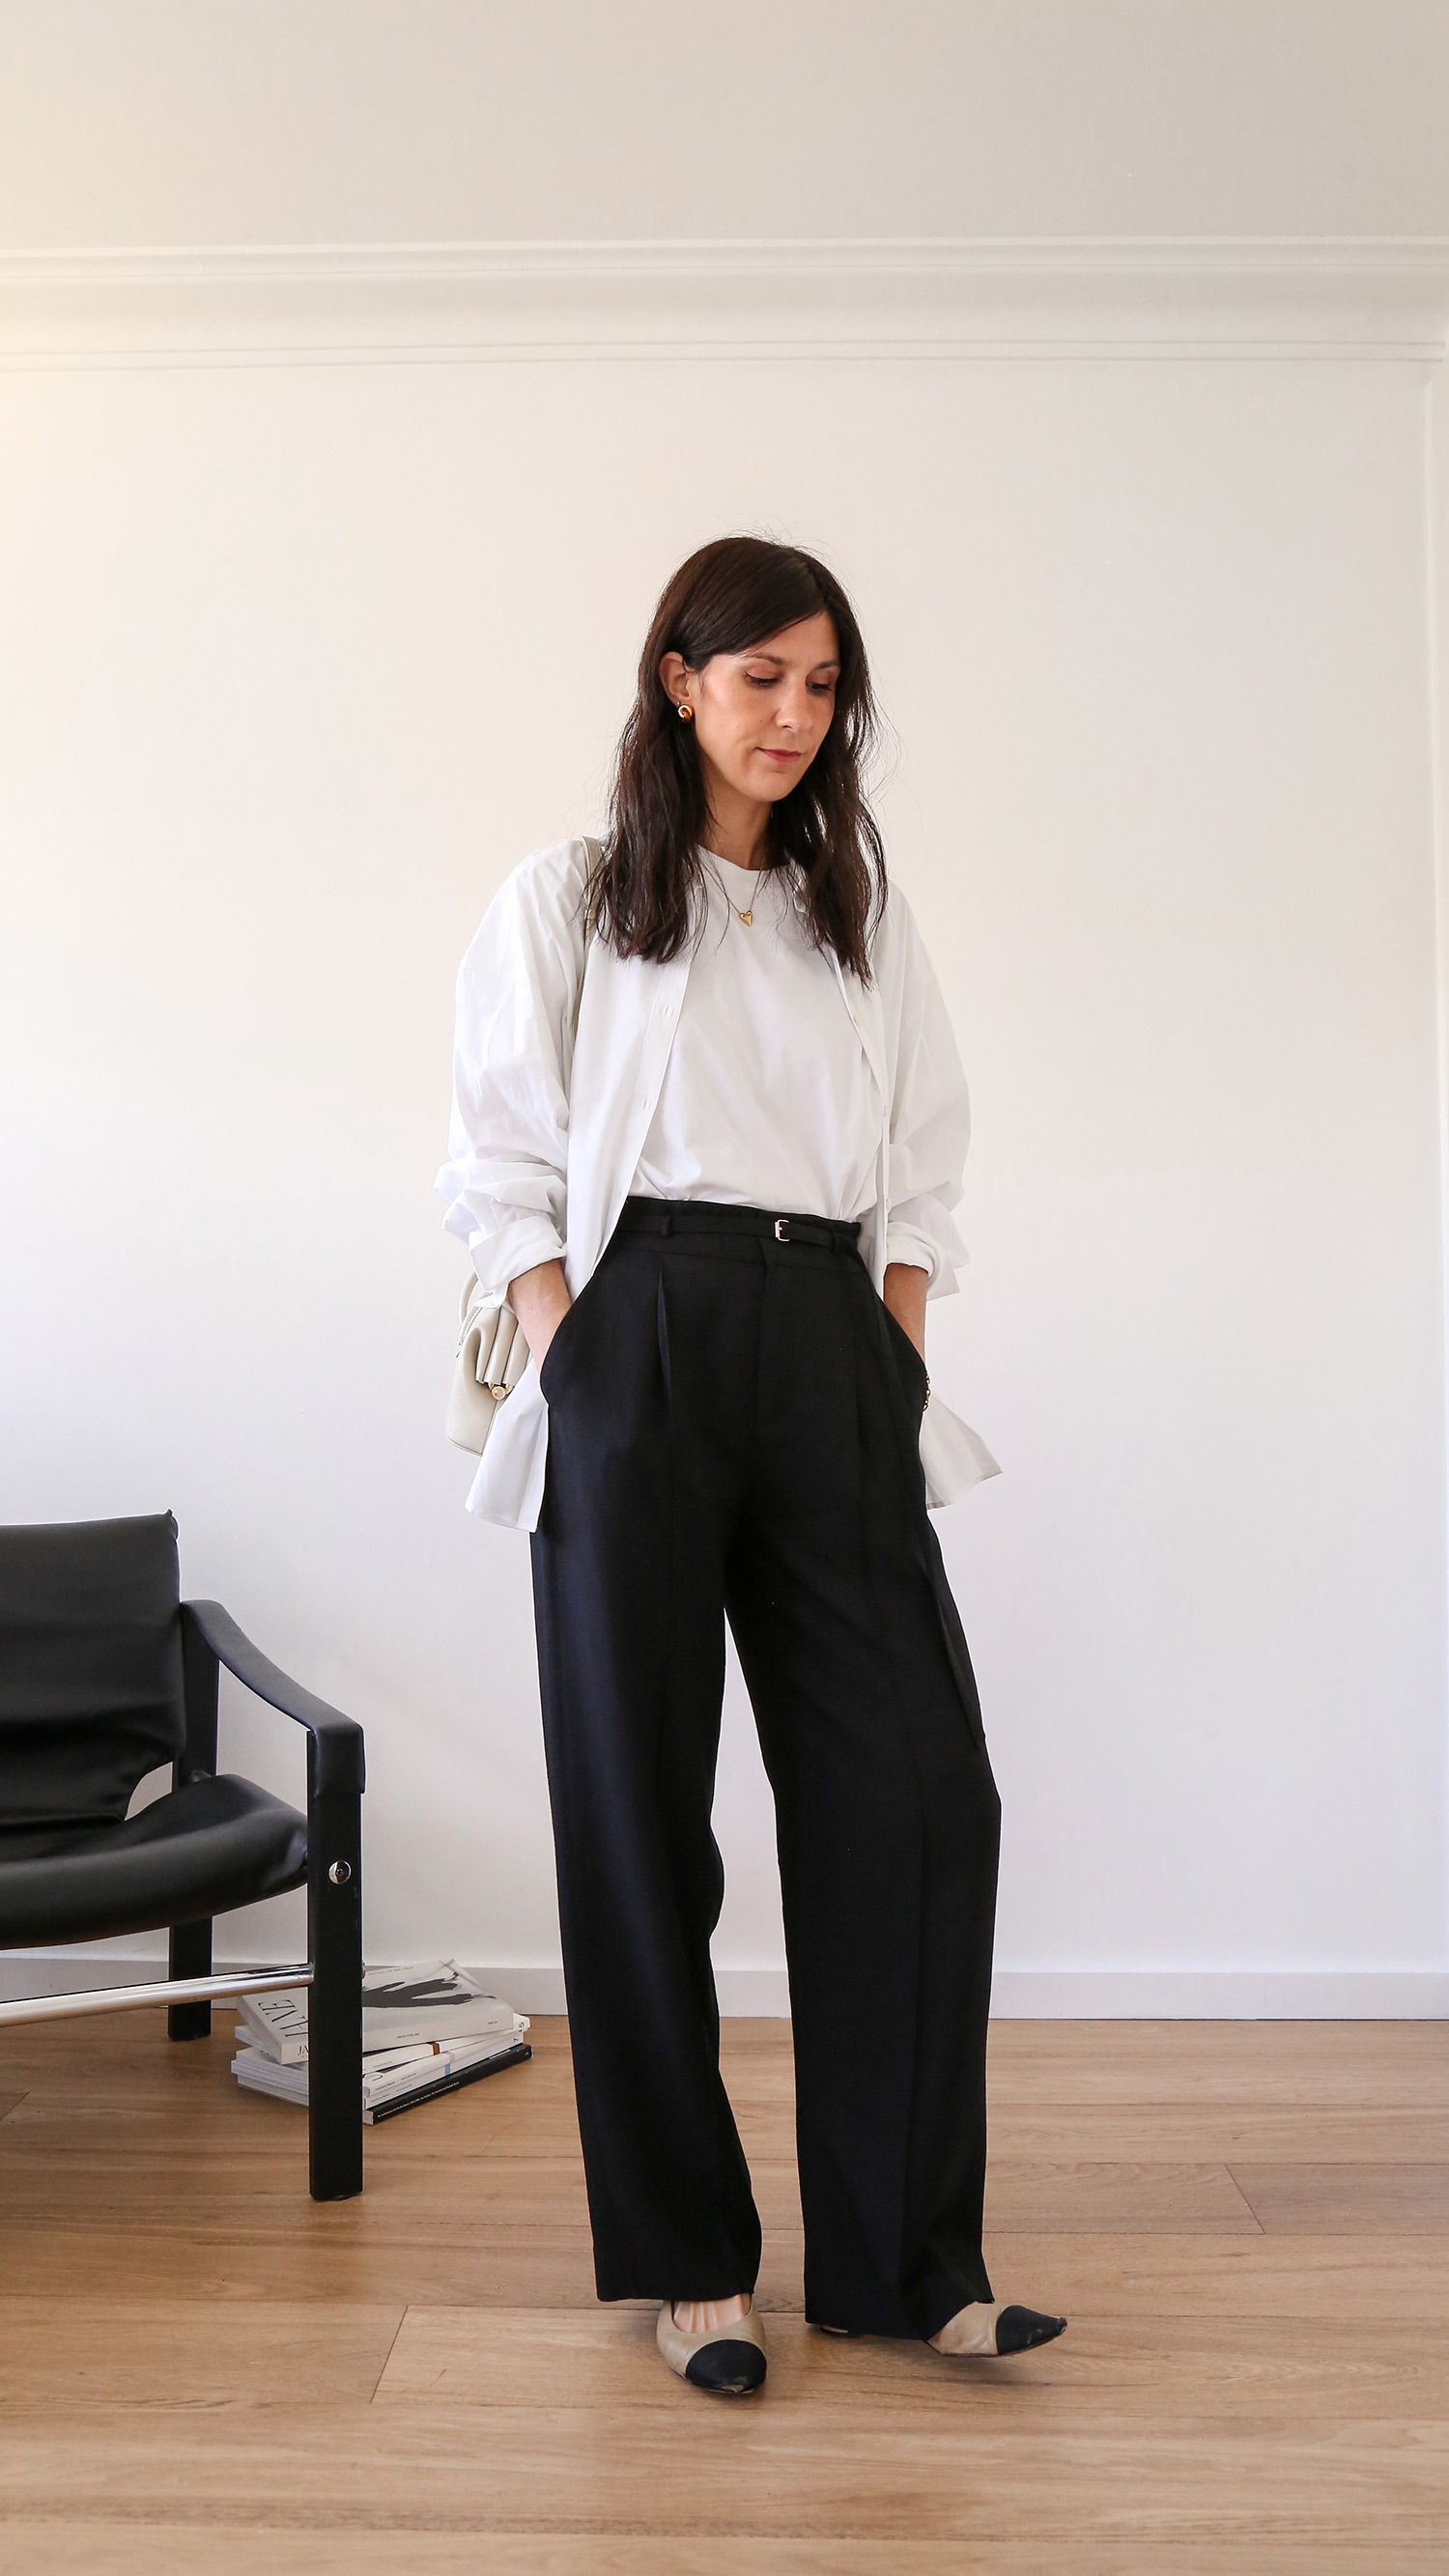 Wearing white tee and black pants with white shirt the row inspired Kendall Jenner